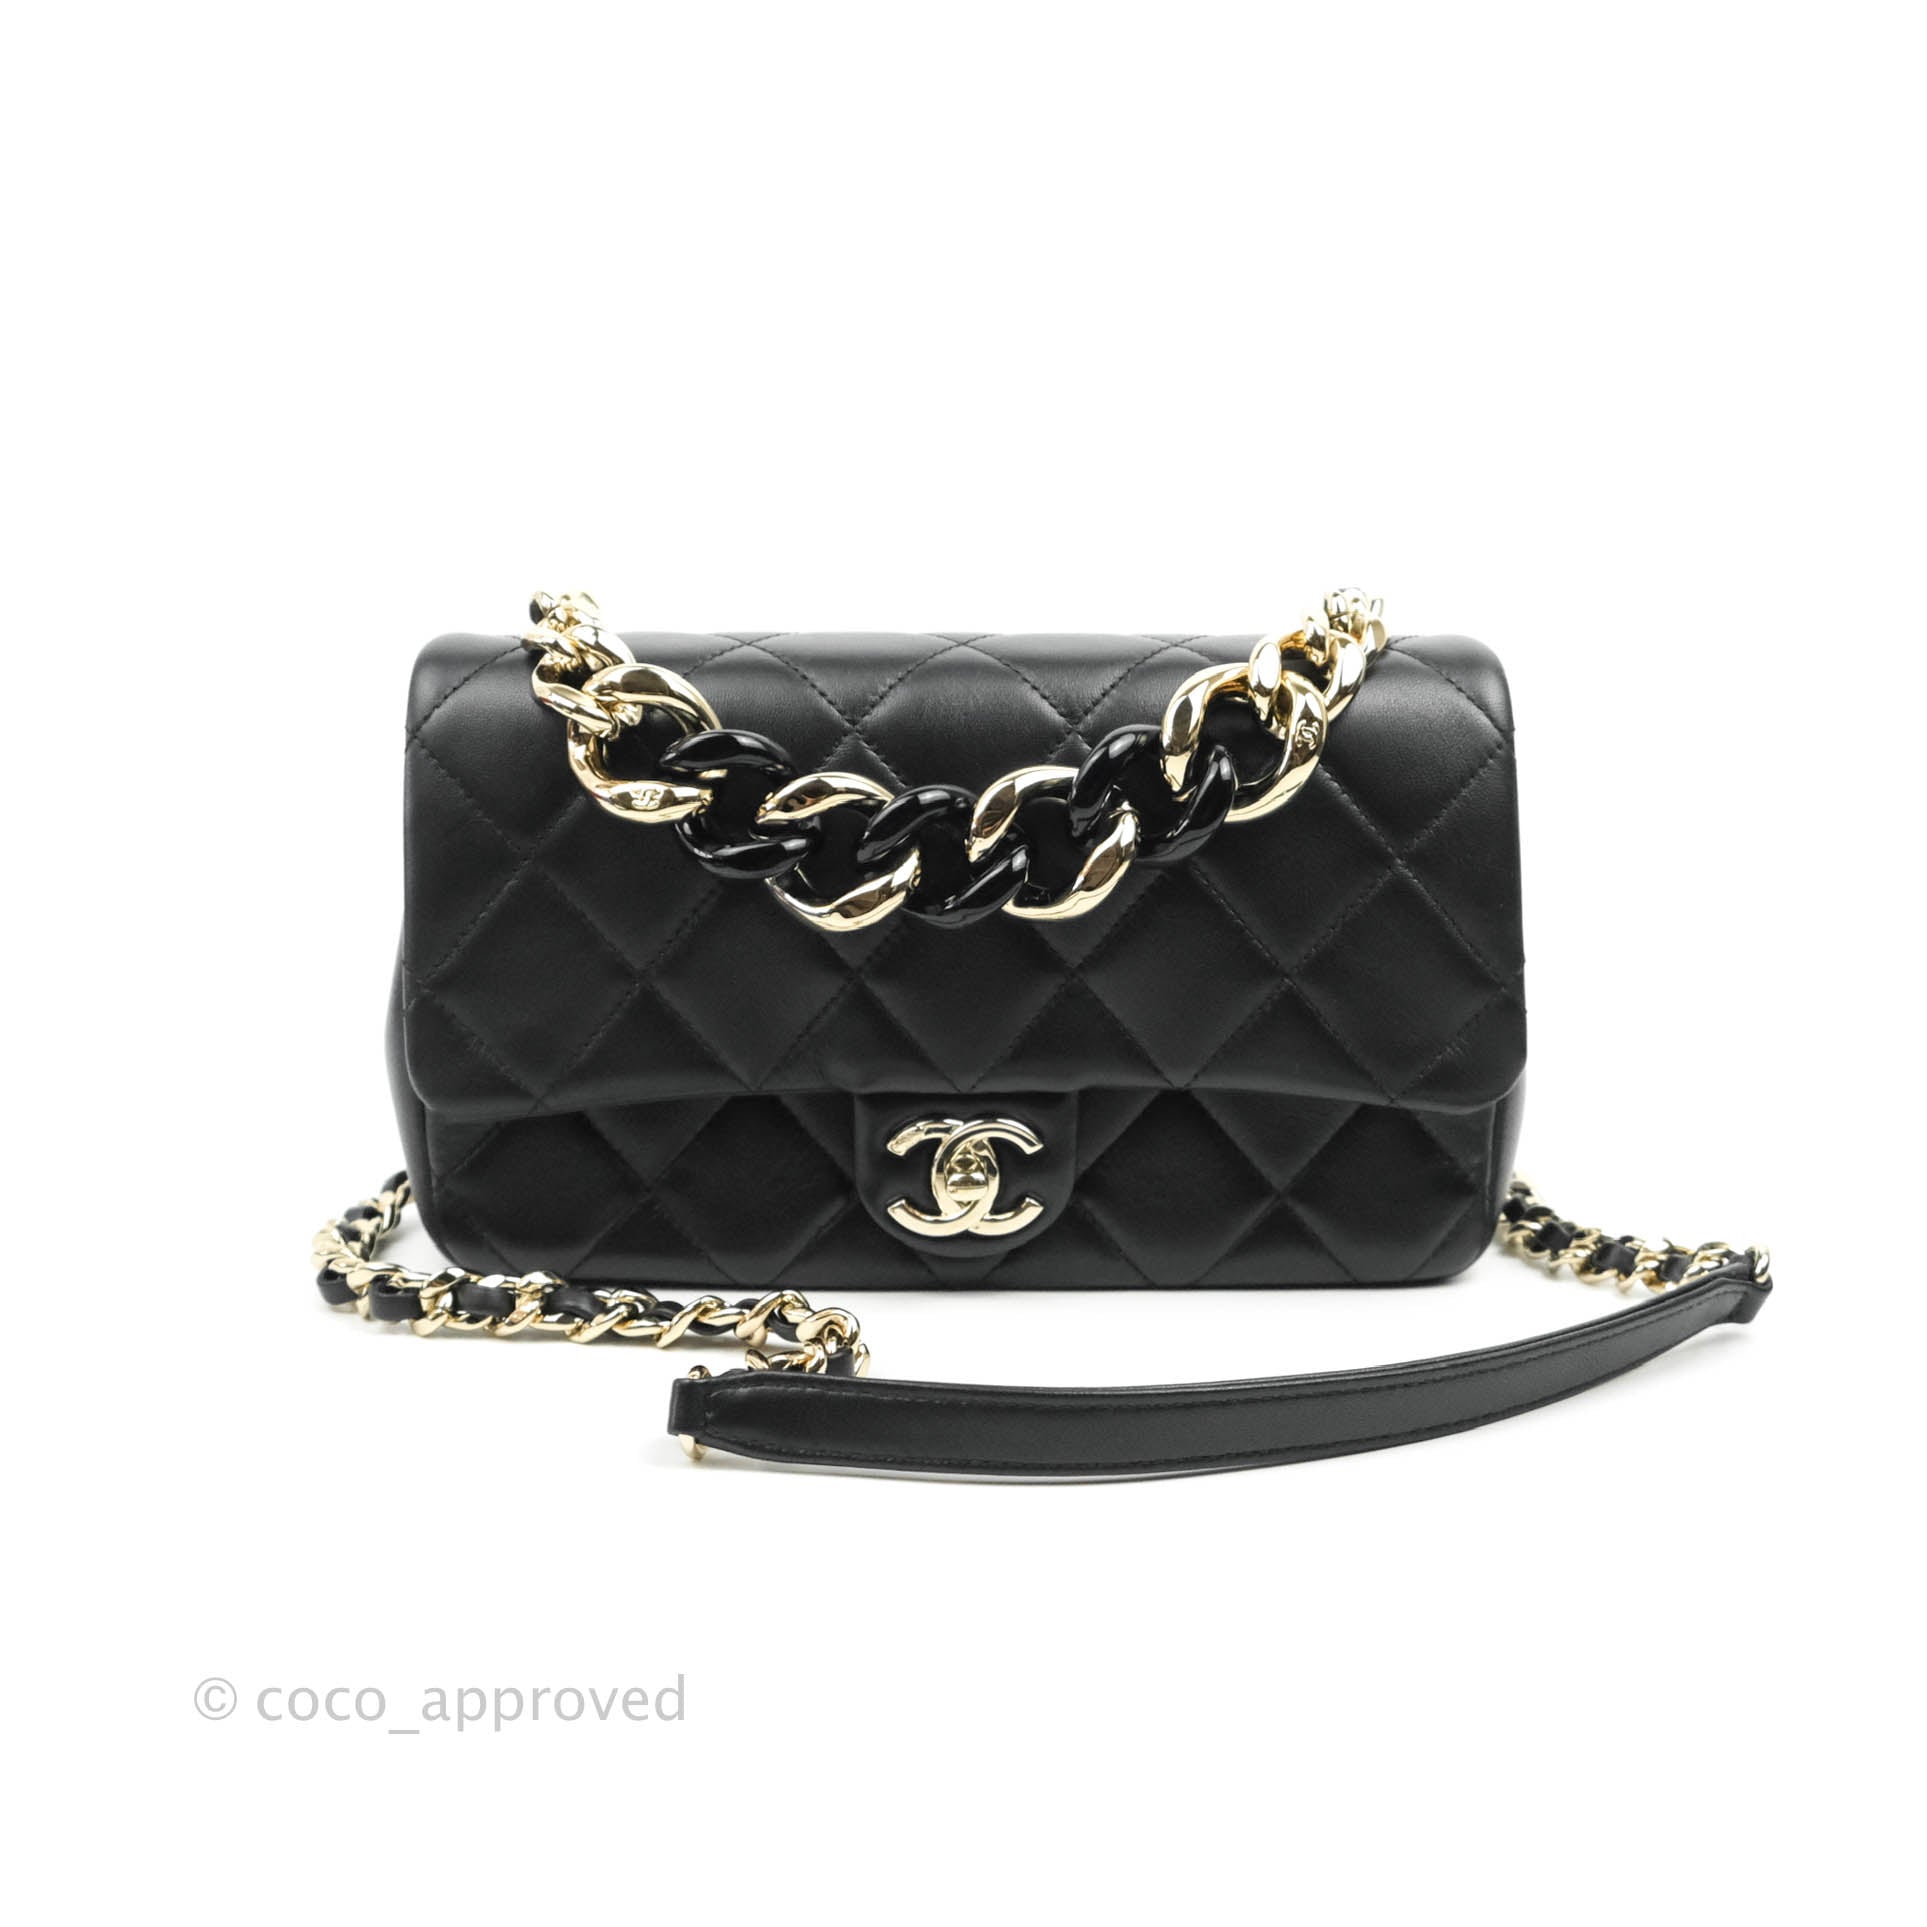 chanel large flap with top handle bag